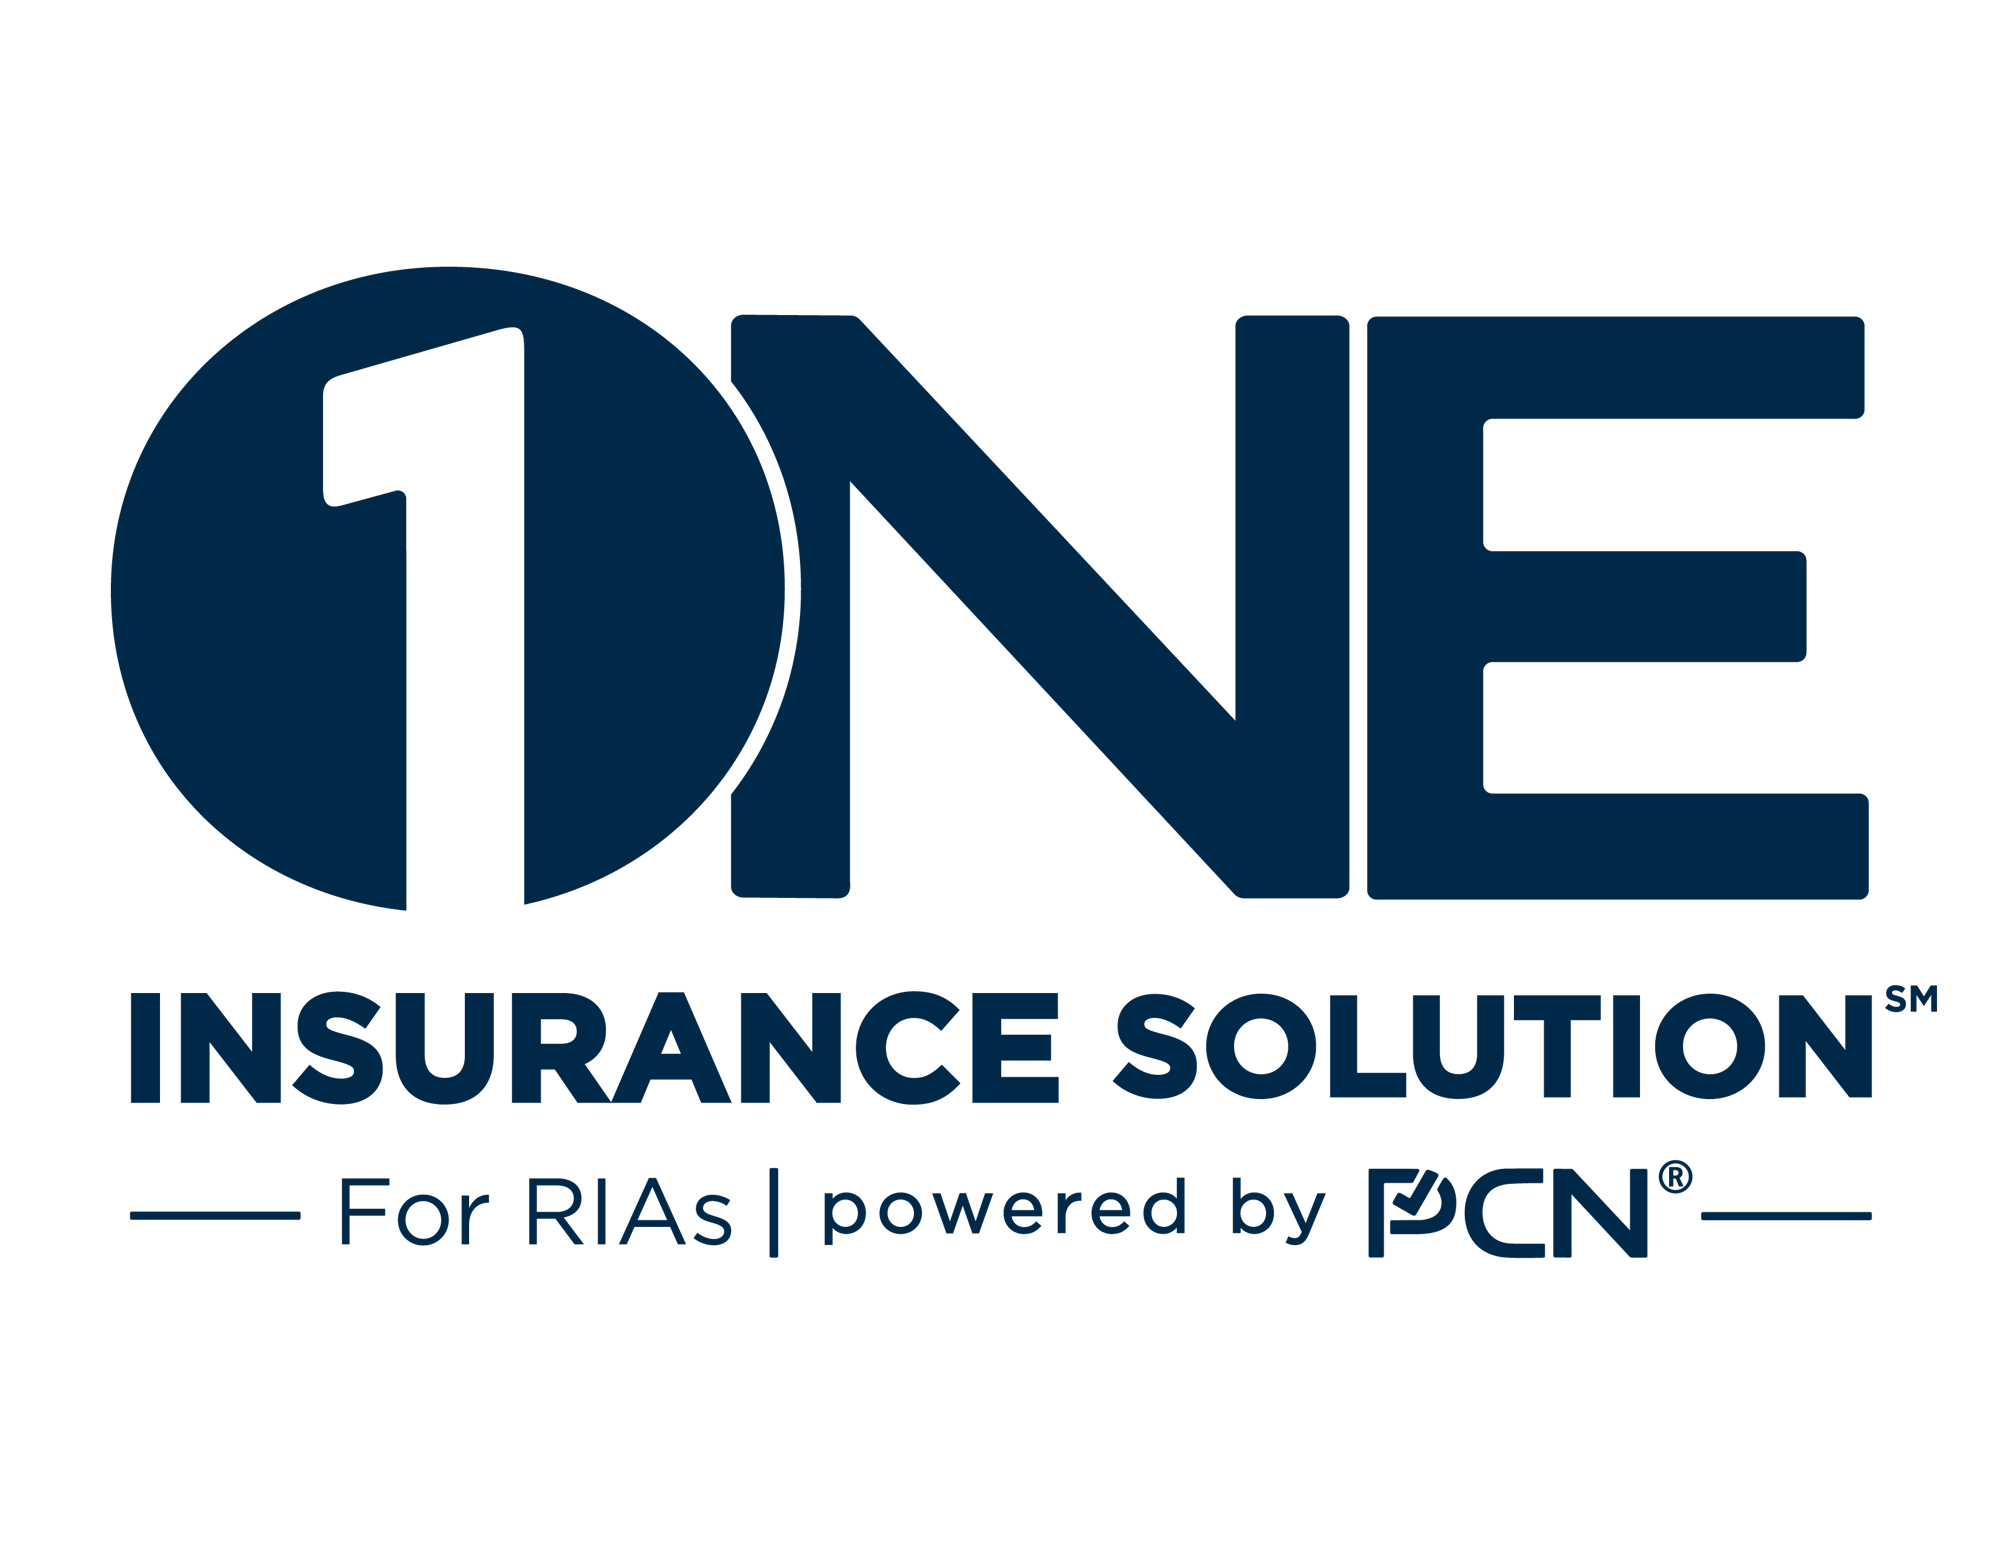 One Insurance Solution for RIAs